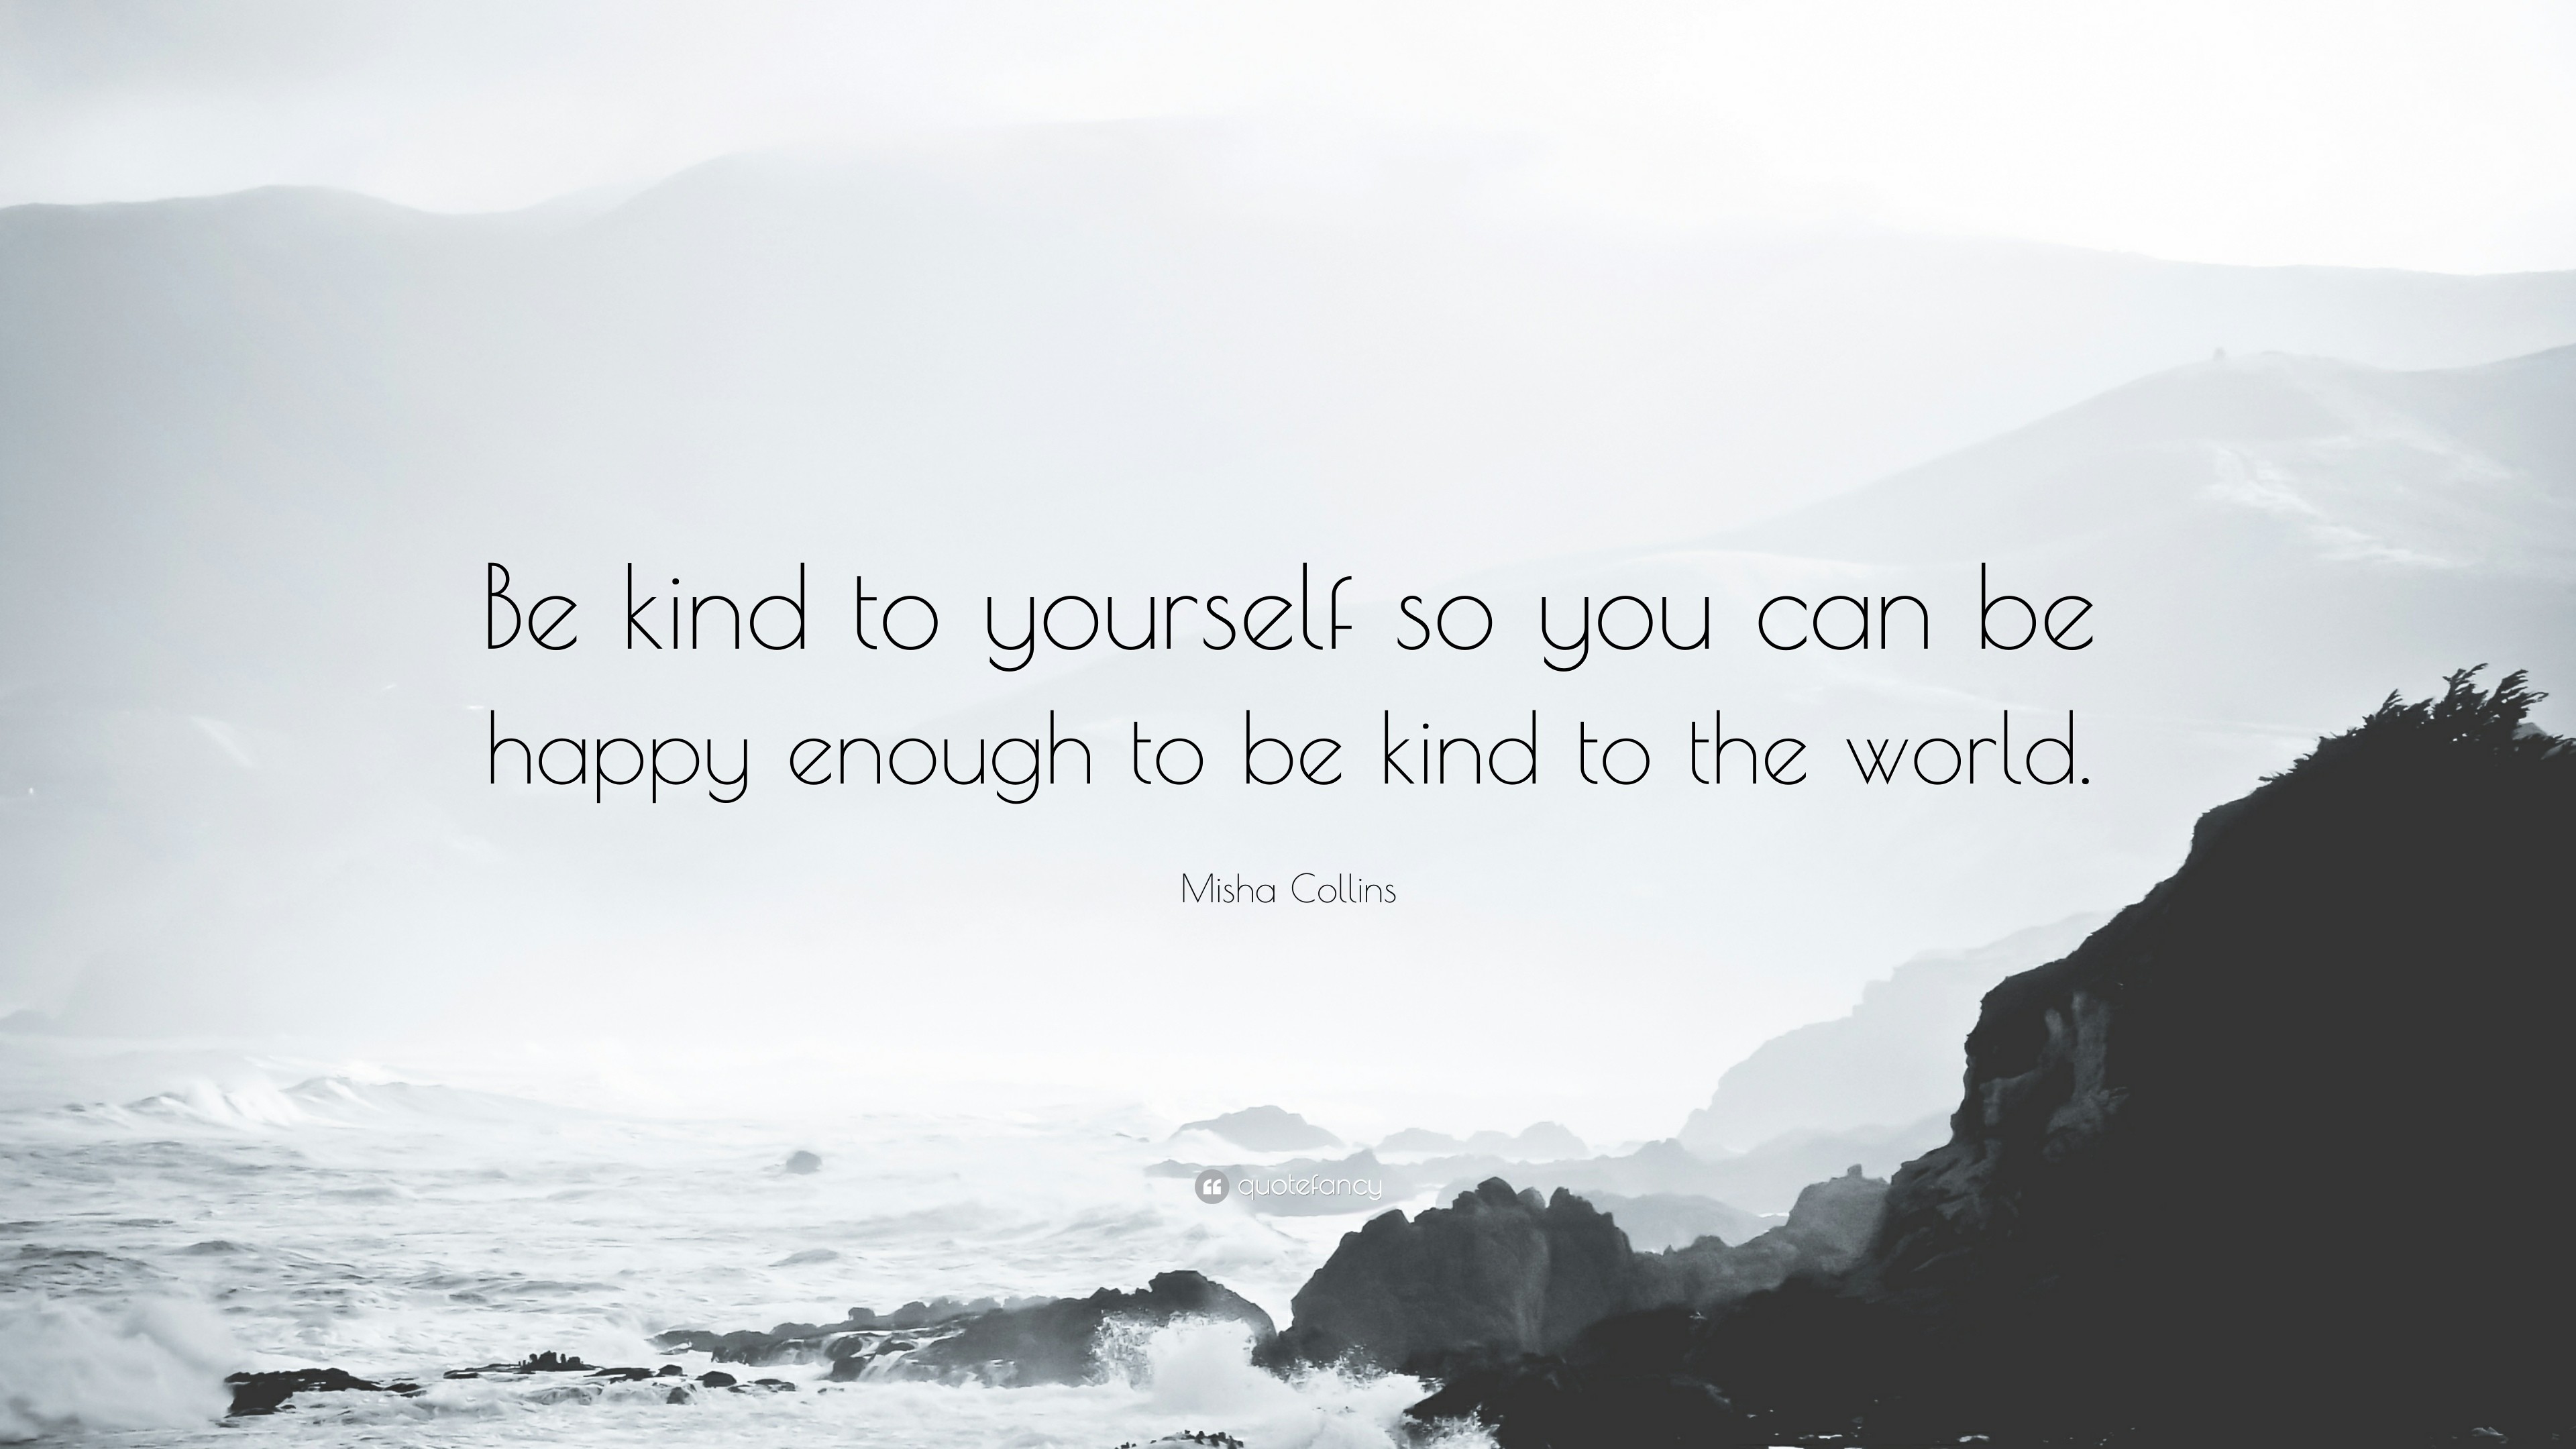 3840x2160 Misha Collins Quote: “Be kind to yourself so you can be happy enough to